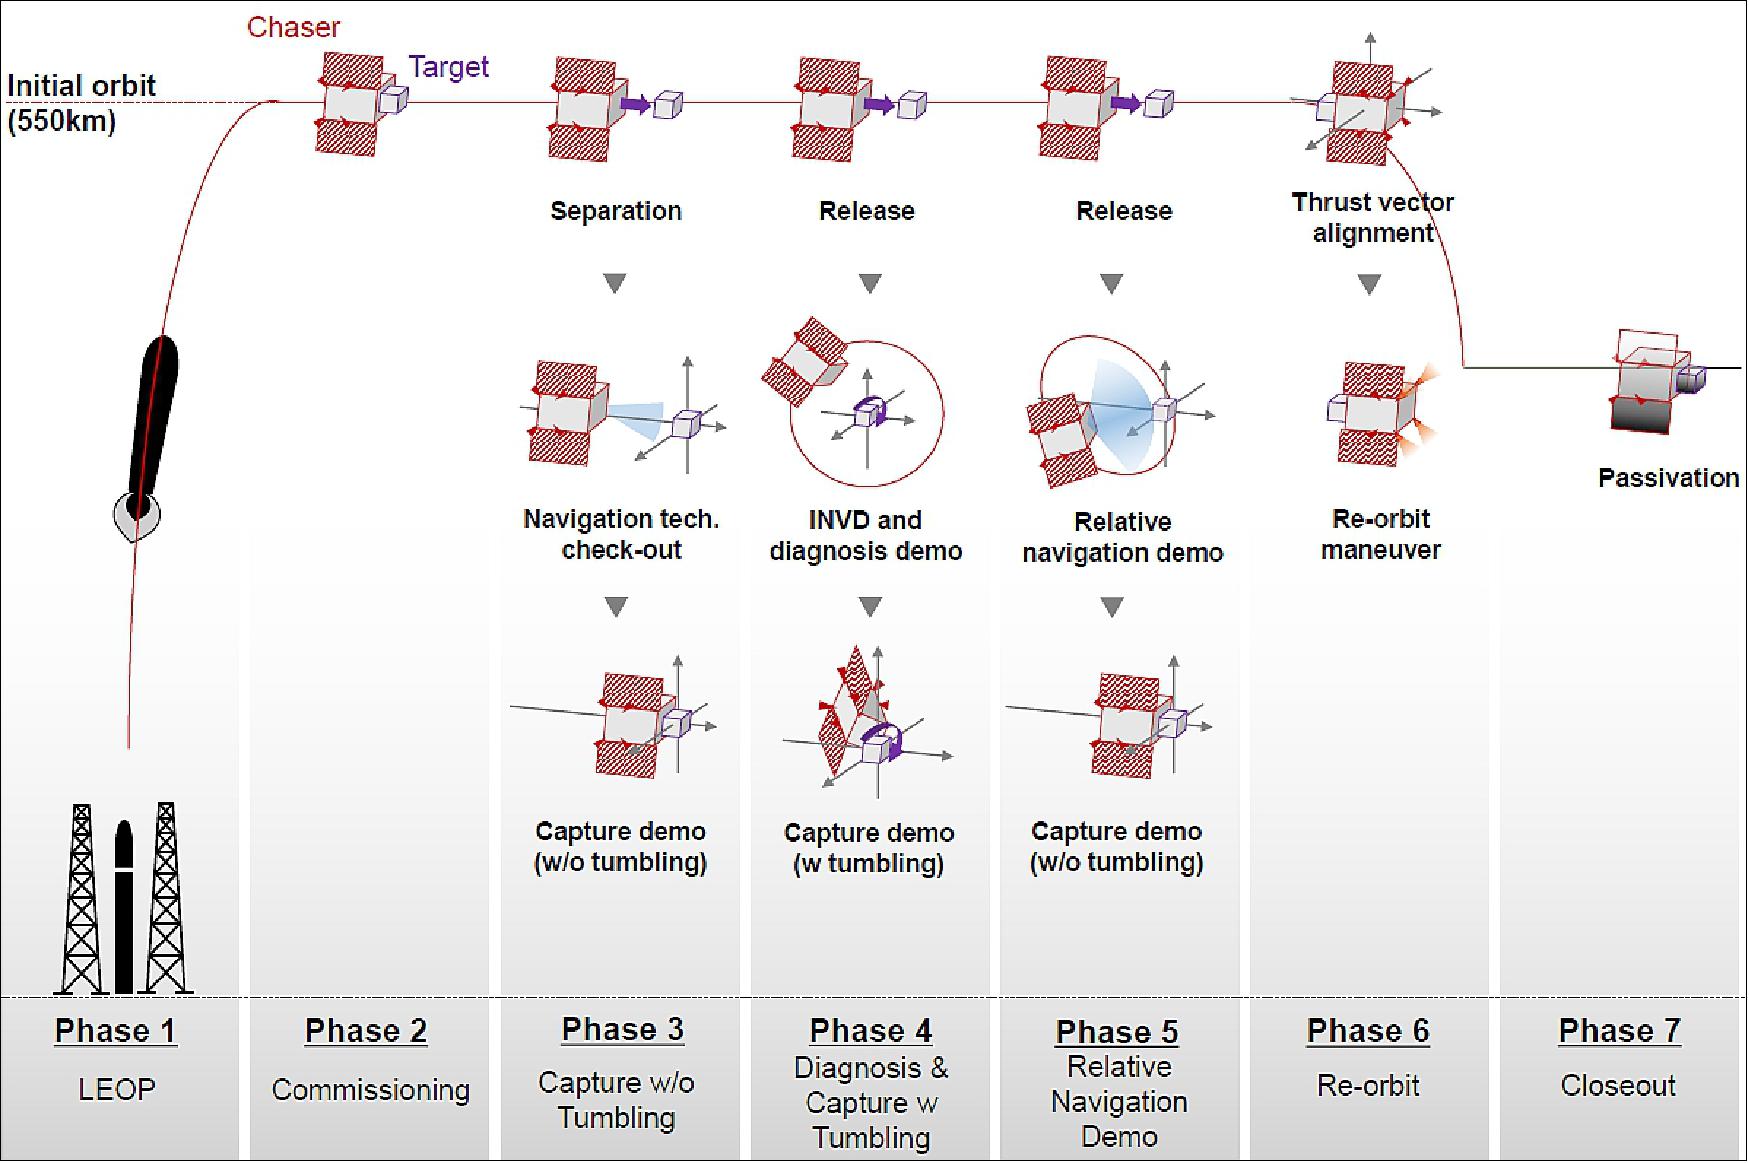 Figure 4: This figure shows the mission CONOPS through 7 mission phases, progressing from launch and commissioning (phase 1 to 2), initial non-tumbling capture (phase 3), tumbling capture (phase 4), target search demonstration (phase 5), to final re-orbiting and passivation (phase 6 to 7), image credit: Astroscale